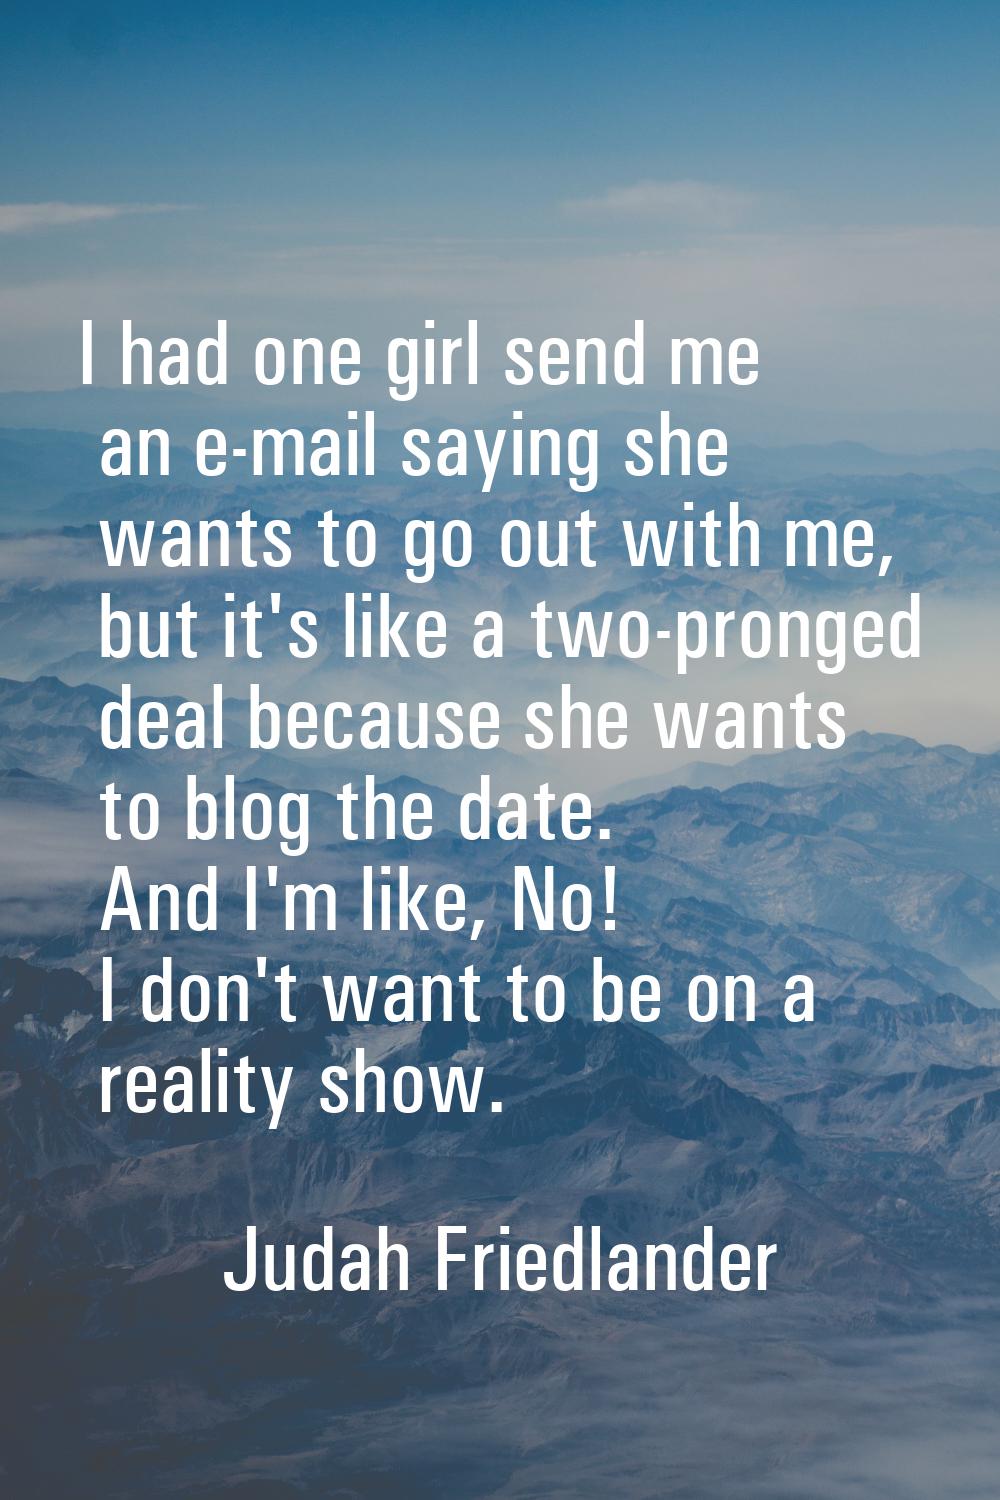 I had one girl send me an e-mail saying she wants to go out with me, but it's like a two-pronged de